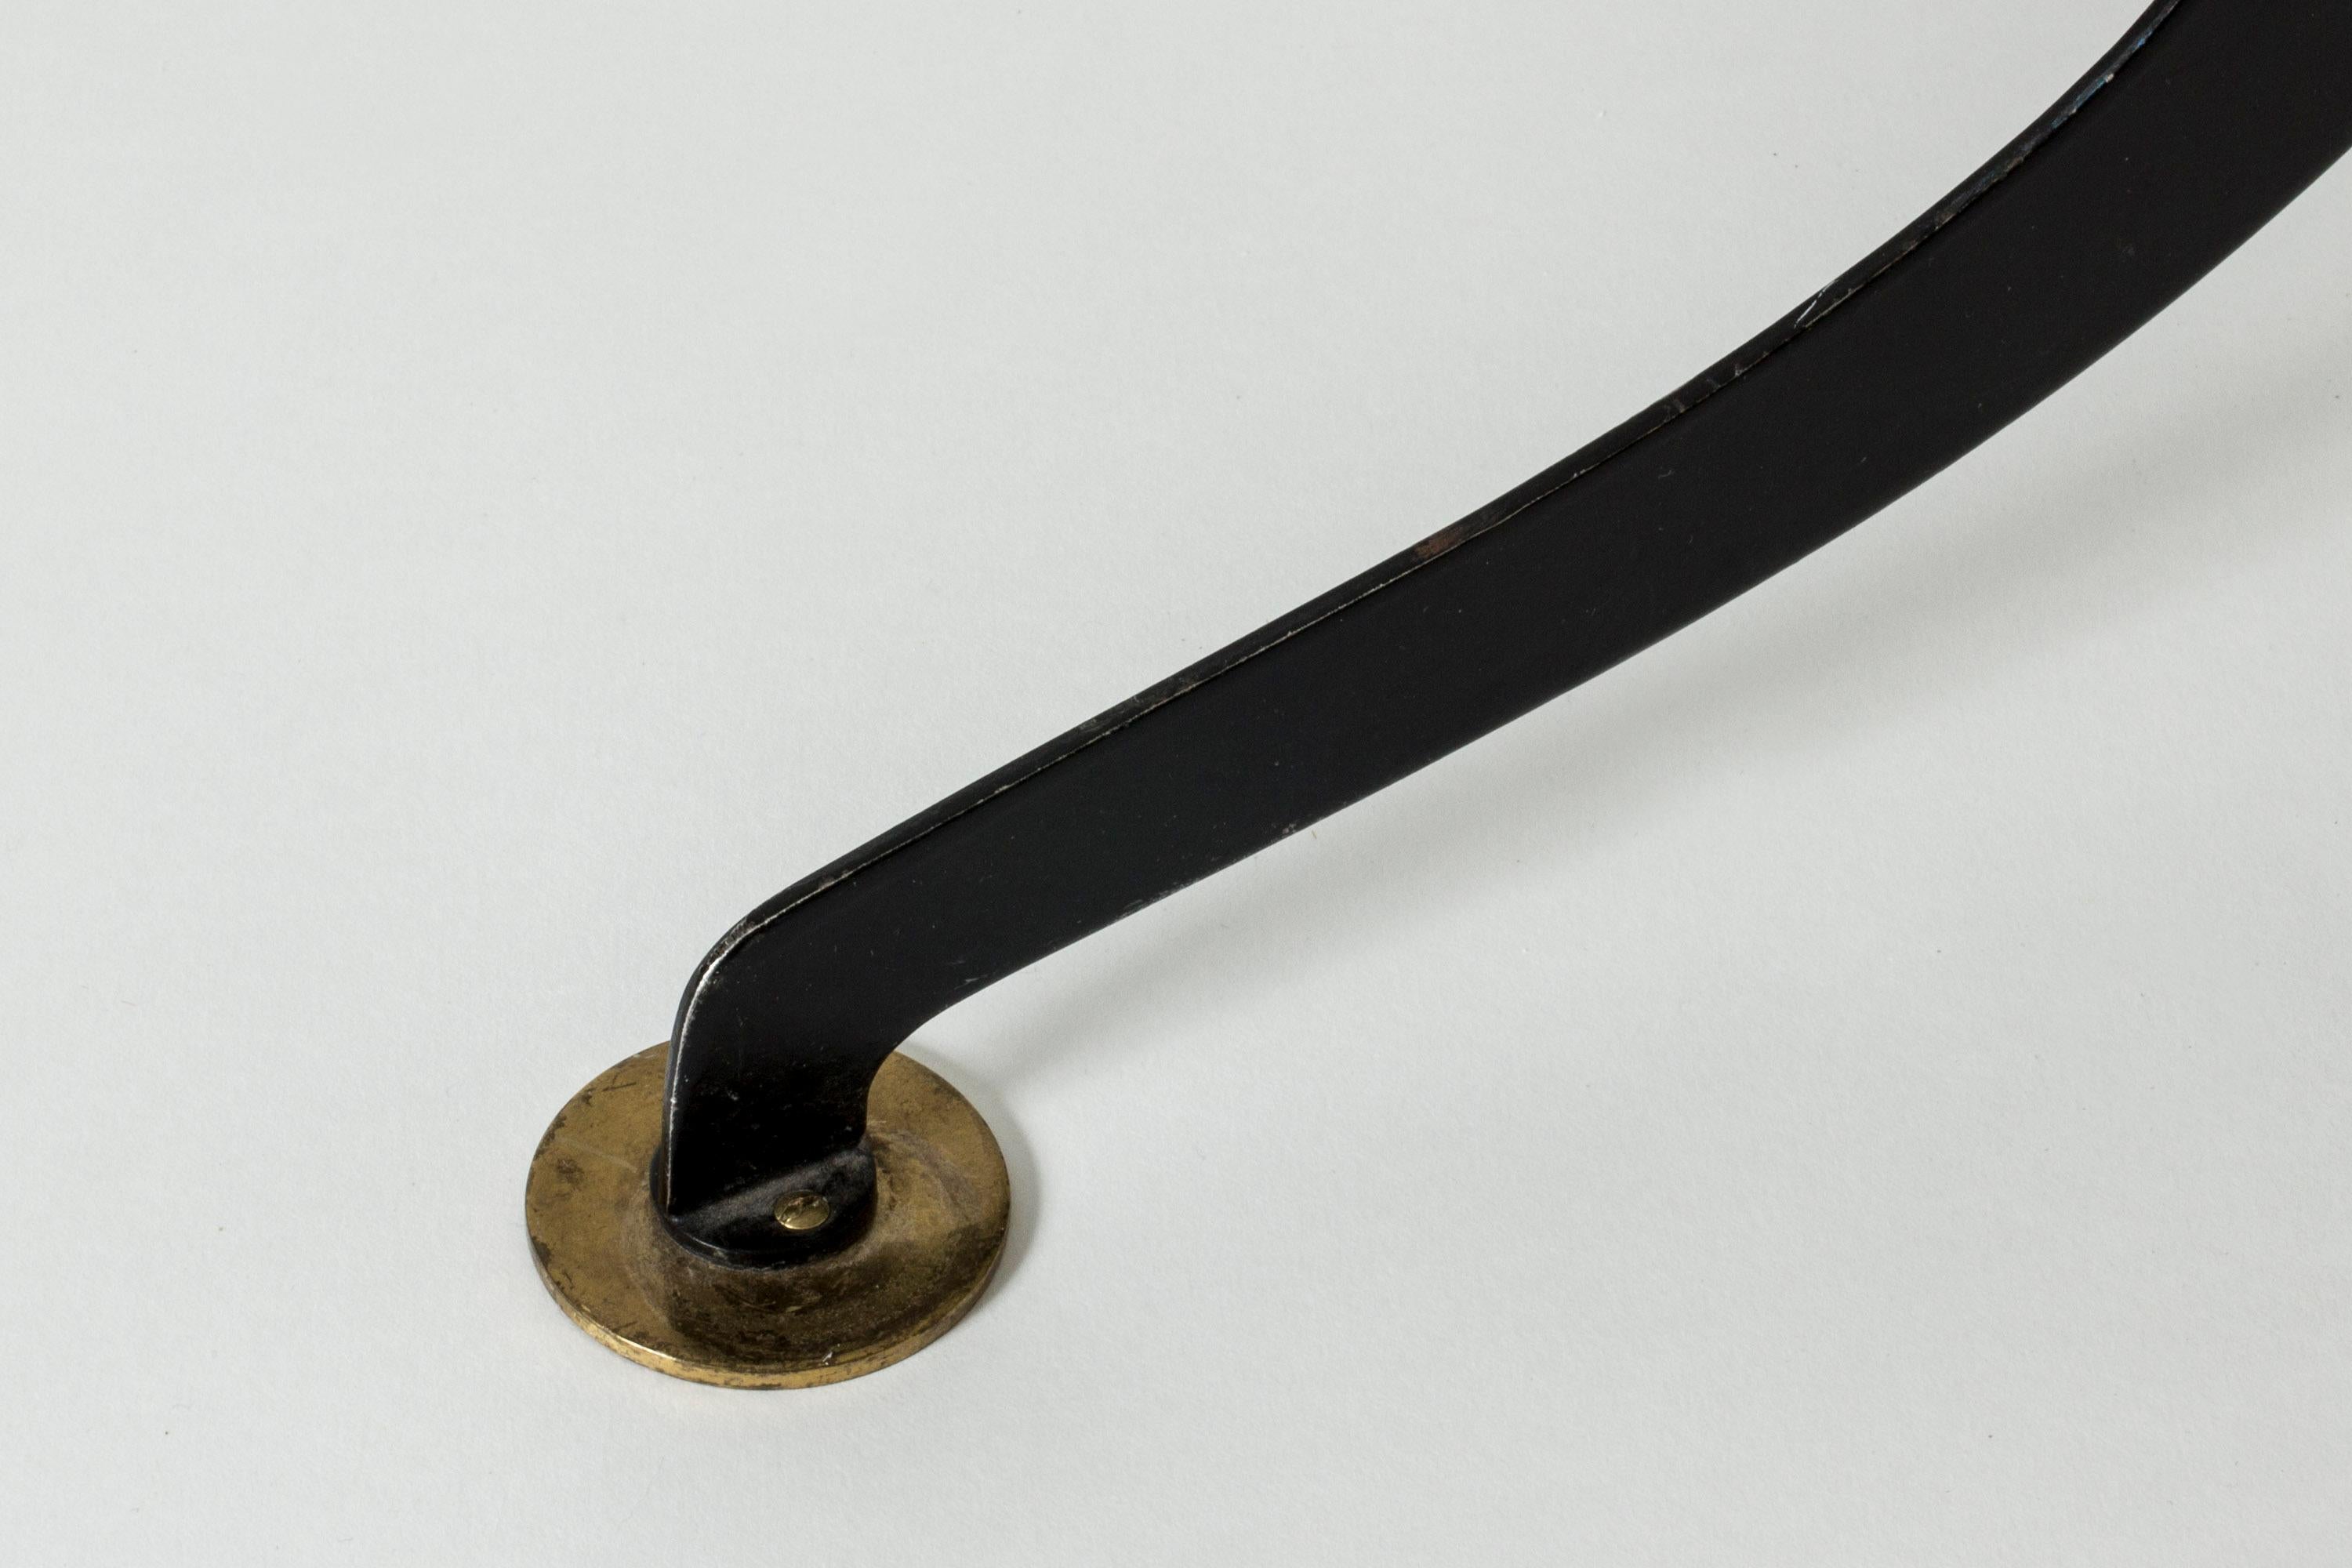 Beautiful, rare floor lamp by Josef Frank, made from black lacquered metal and brass. Distinctly sculpted base, pleated satin shade with loose brass top.

Josef Frank was an Austrian-born architect and designer known for his contributions to the